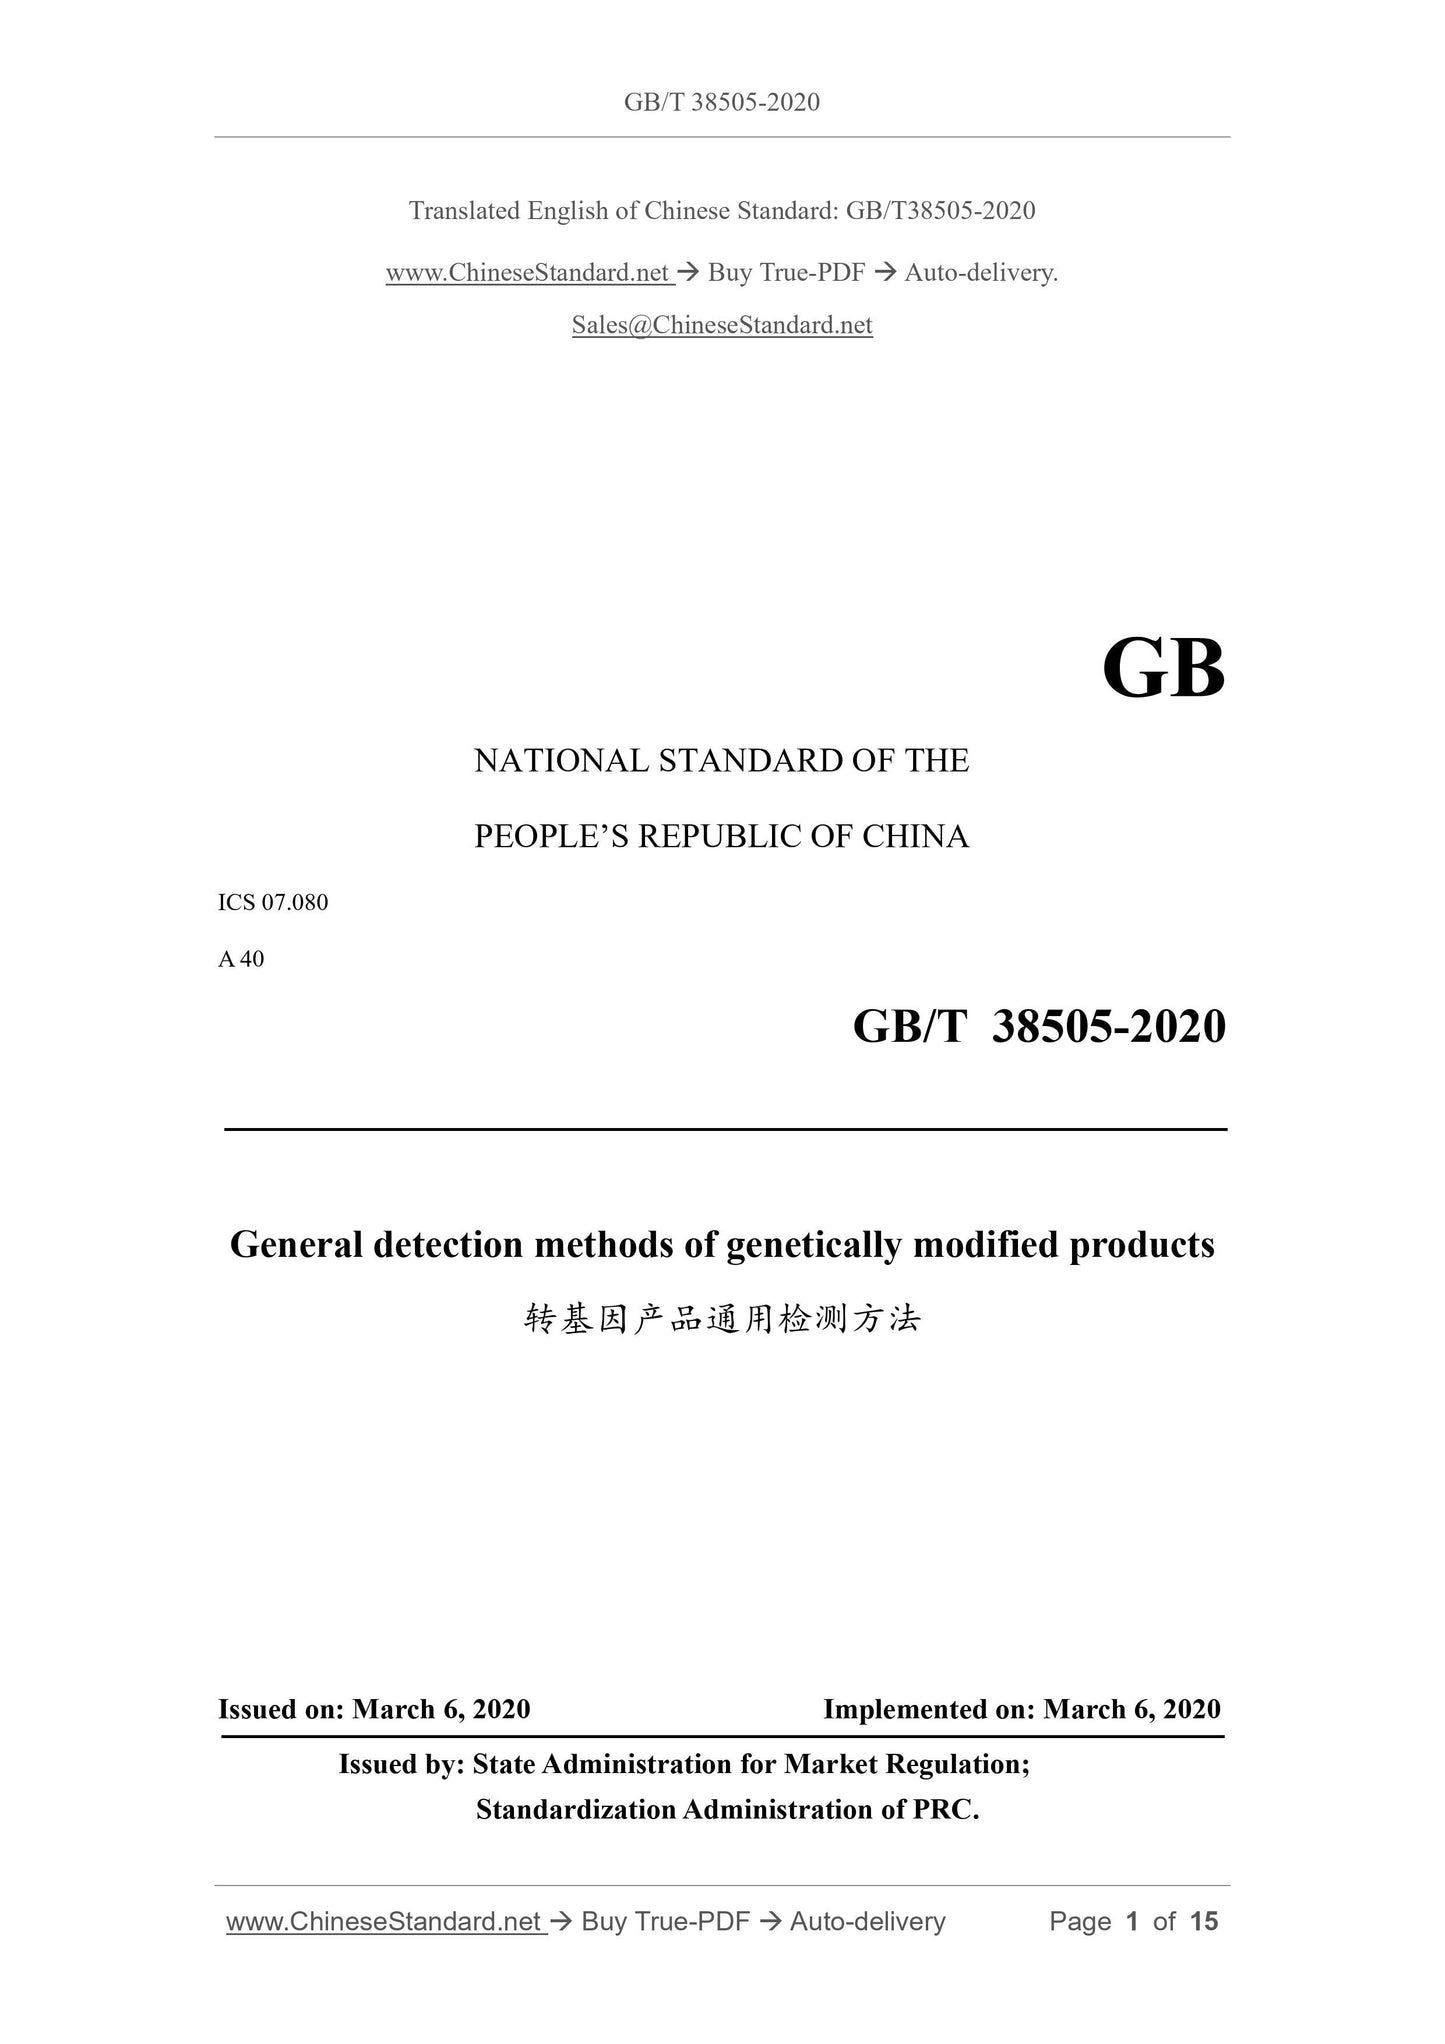 GB/T 38505-2020 Page 1